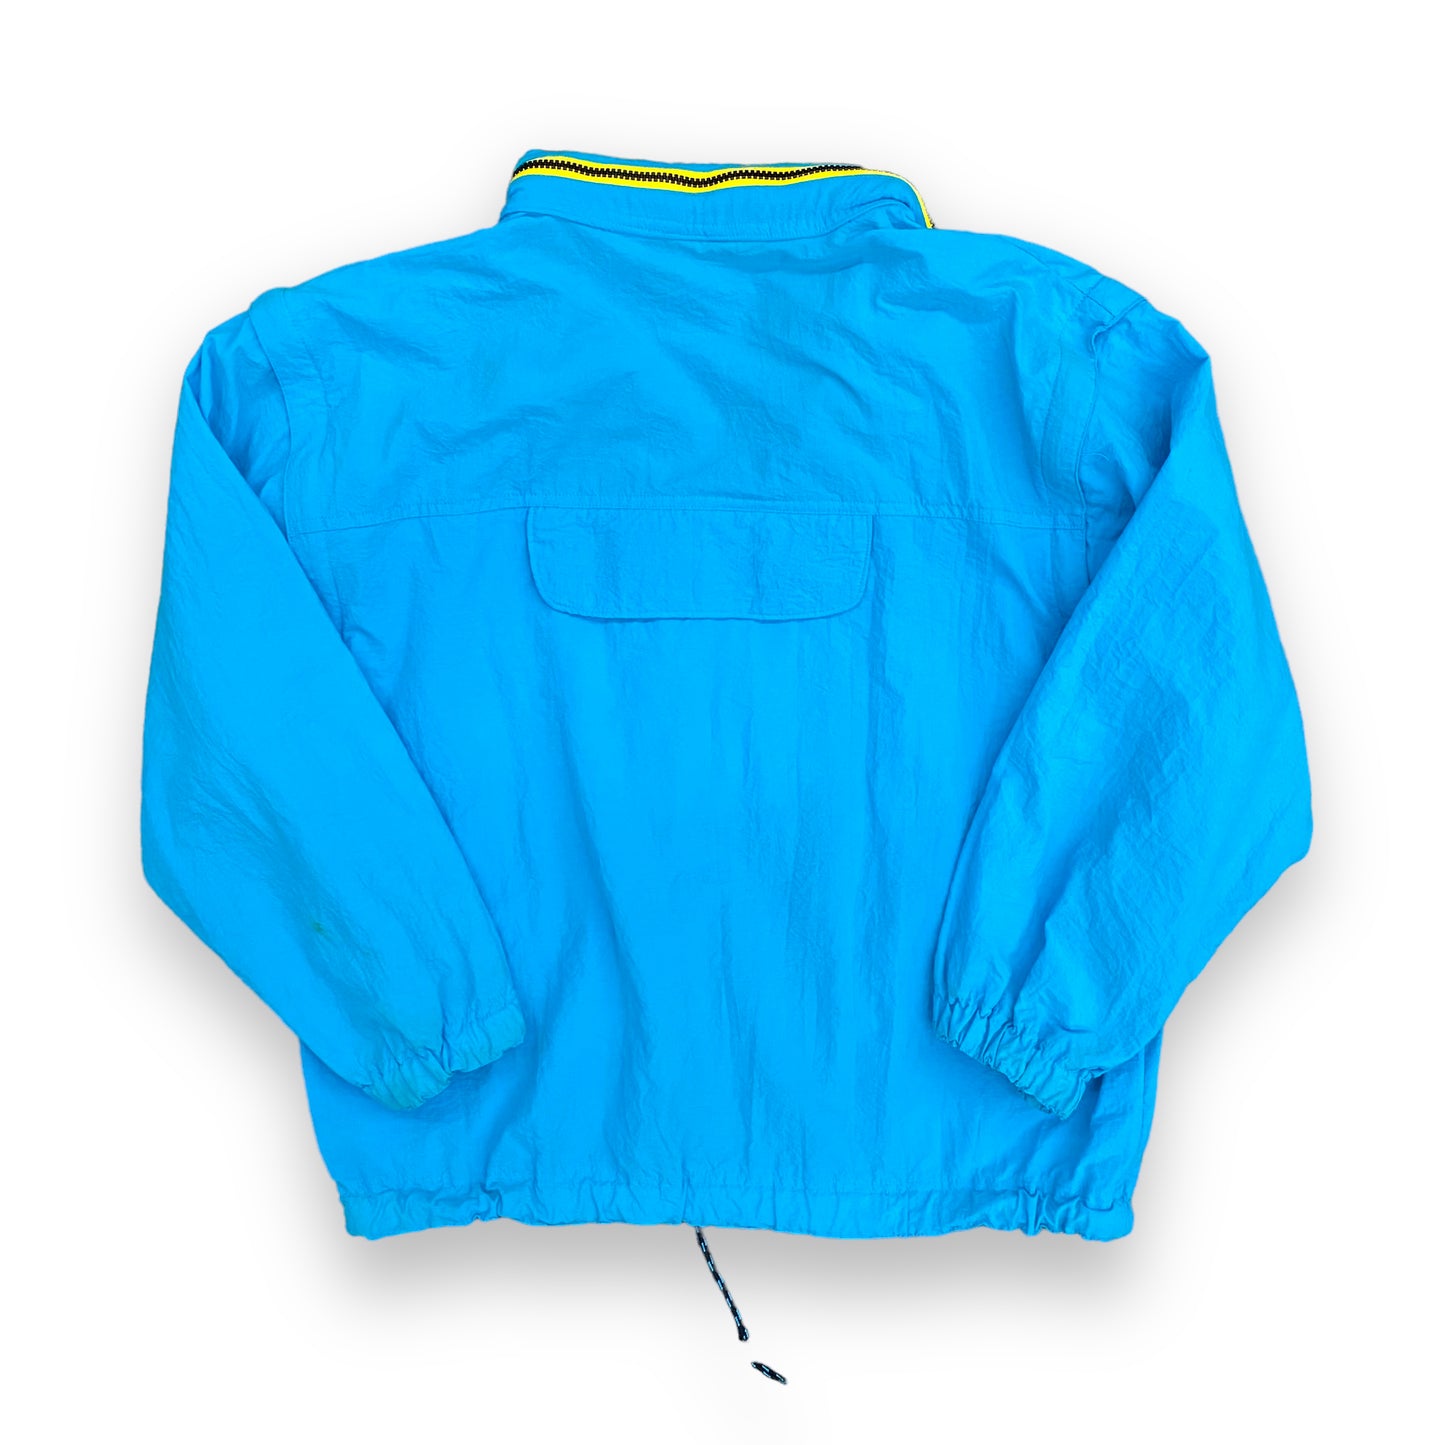 1980s Recreation Teal Windbreaker with Packable Hood & Removable Sleeves - Size Large